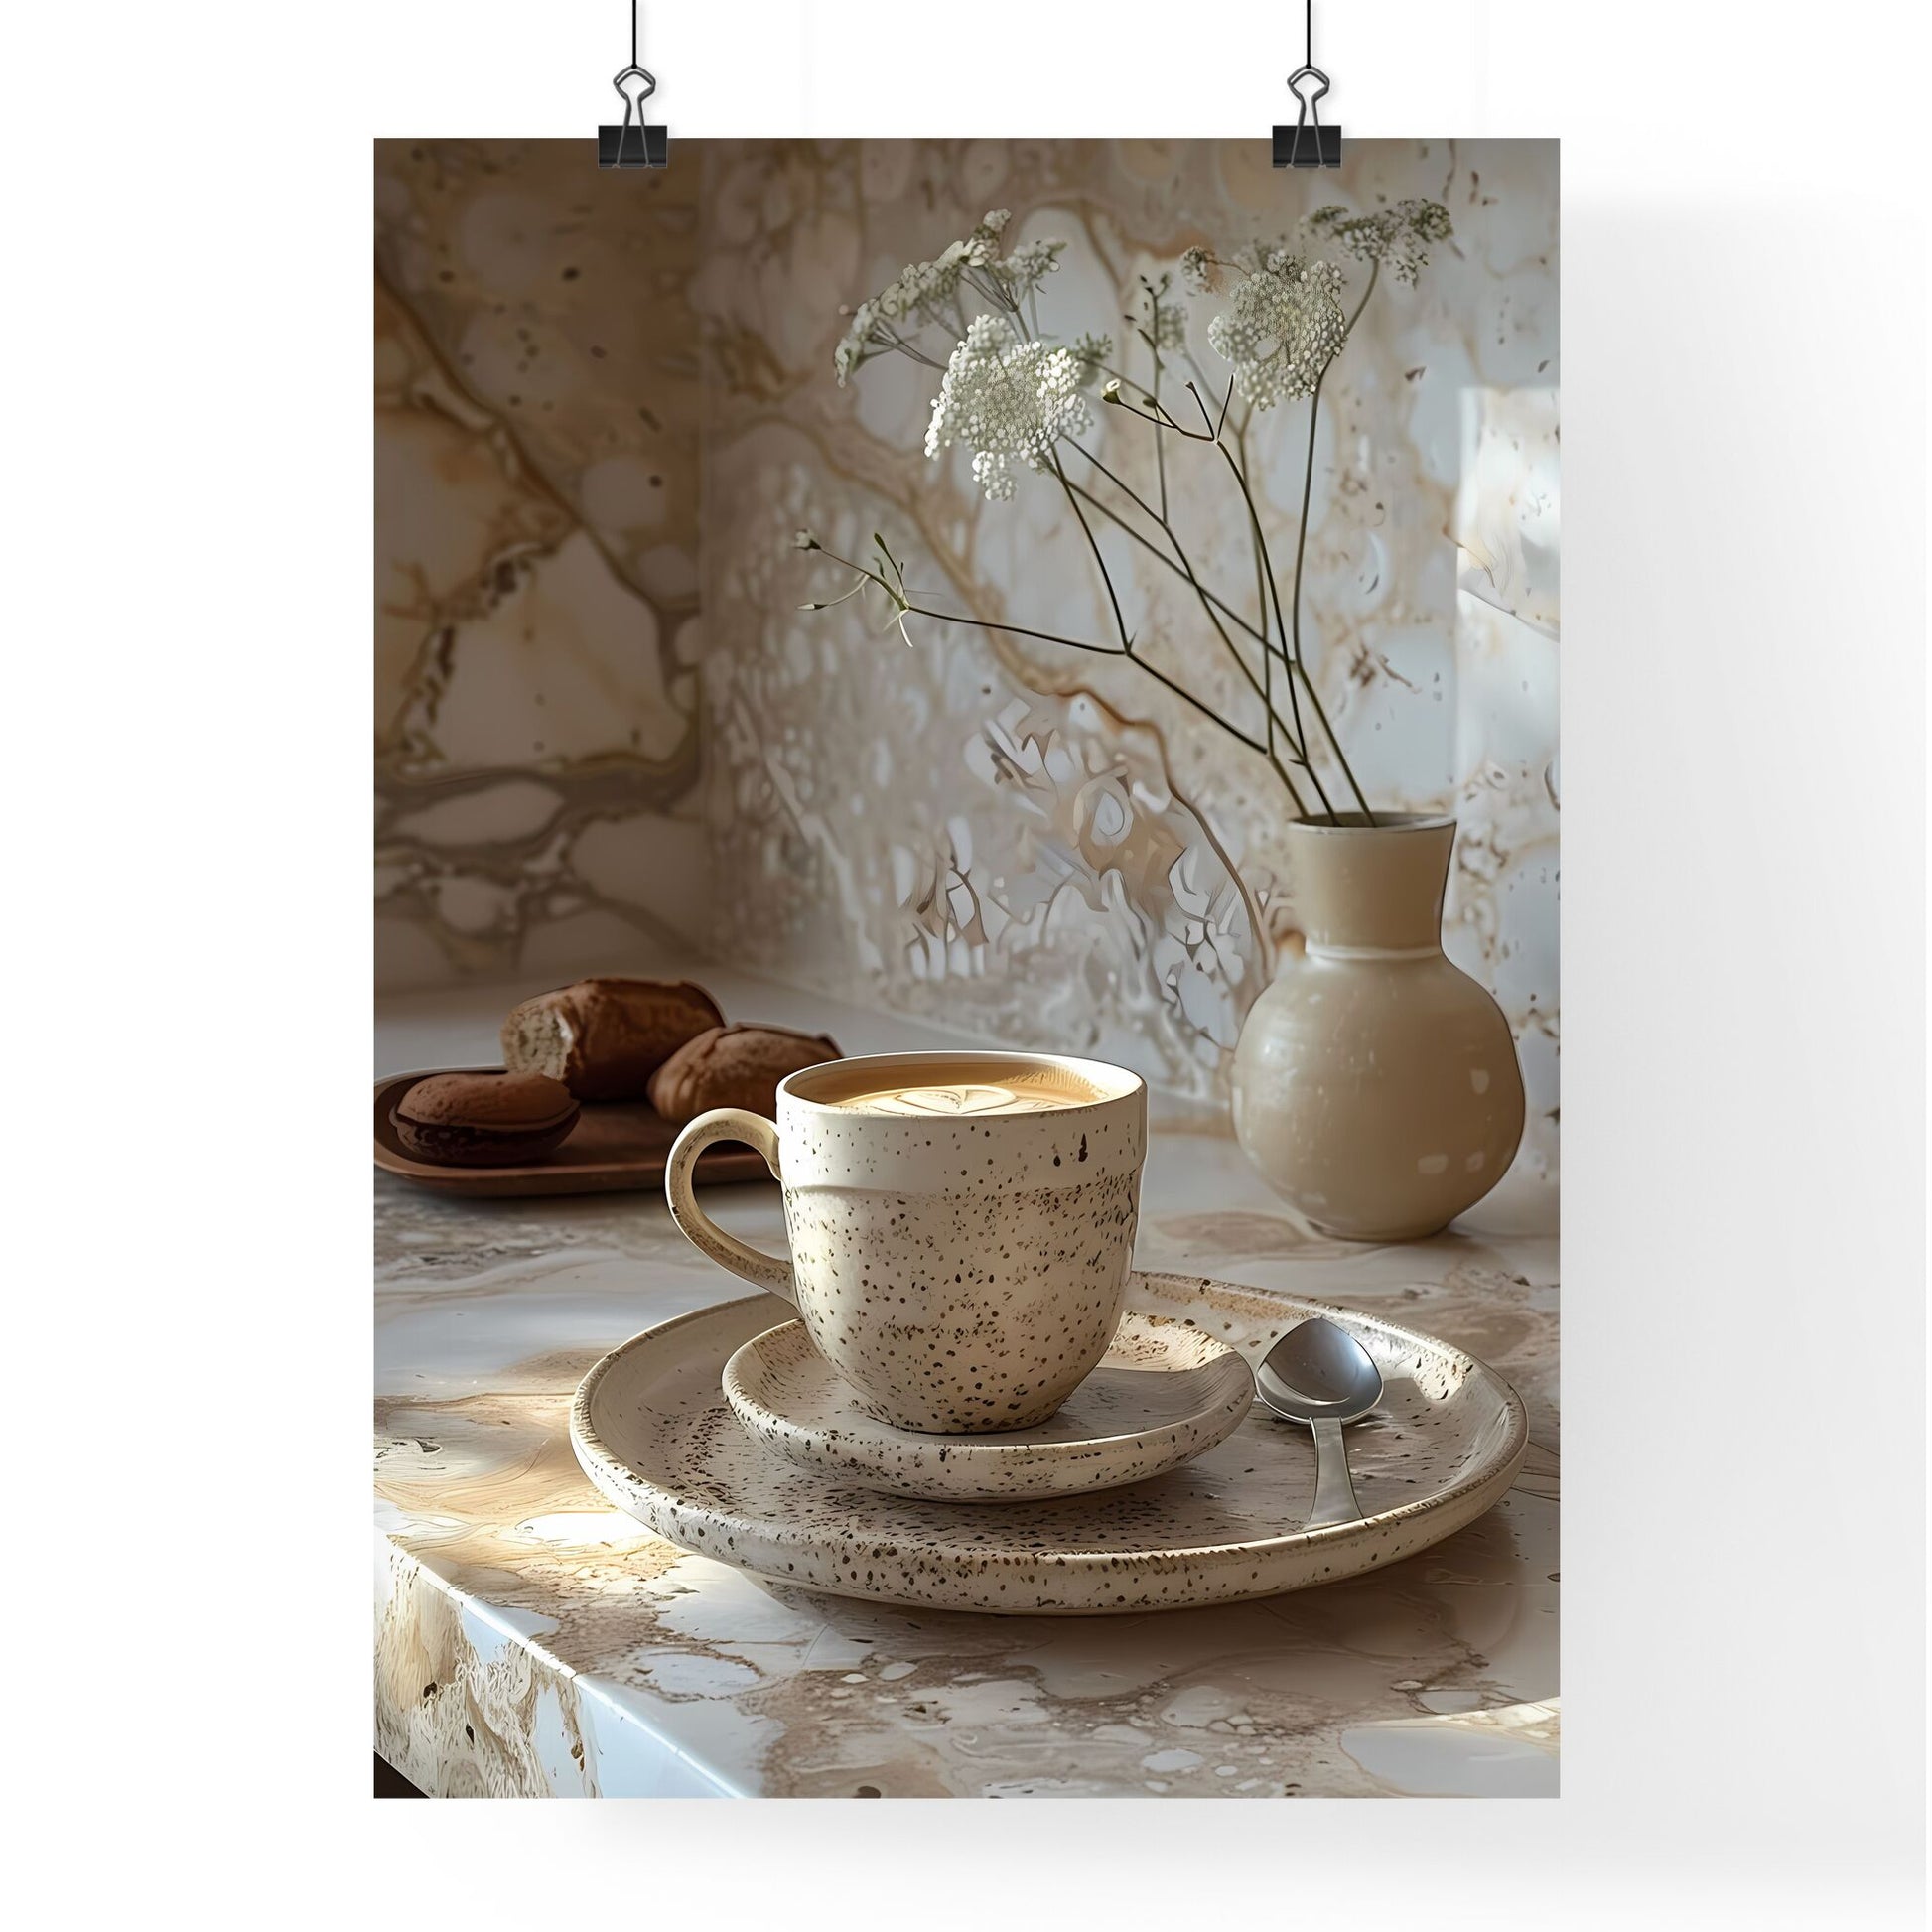 Neo-concrete still life with coffee cup, vase, and flowers, hyper-realistic water, provia film, light brown and white, drugcore, painting Default Title